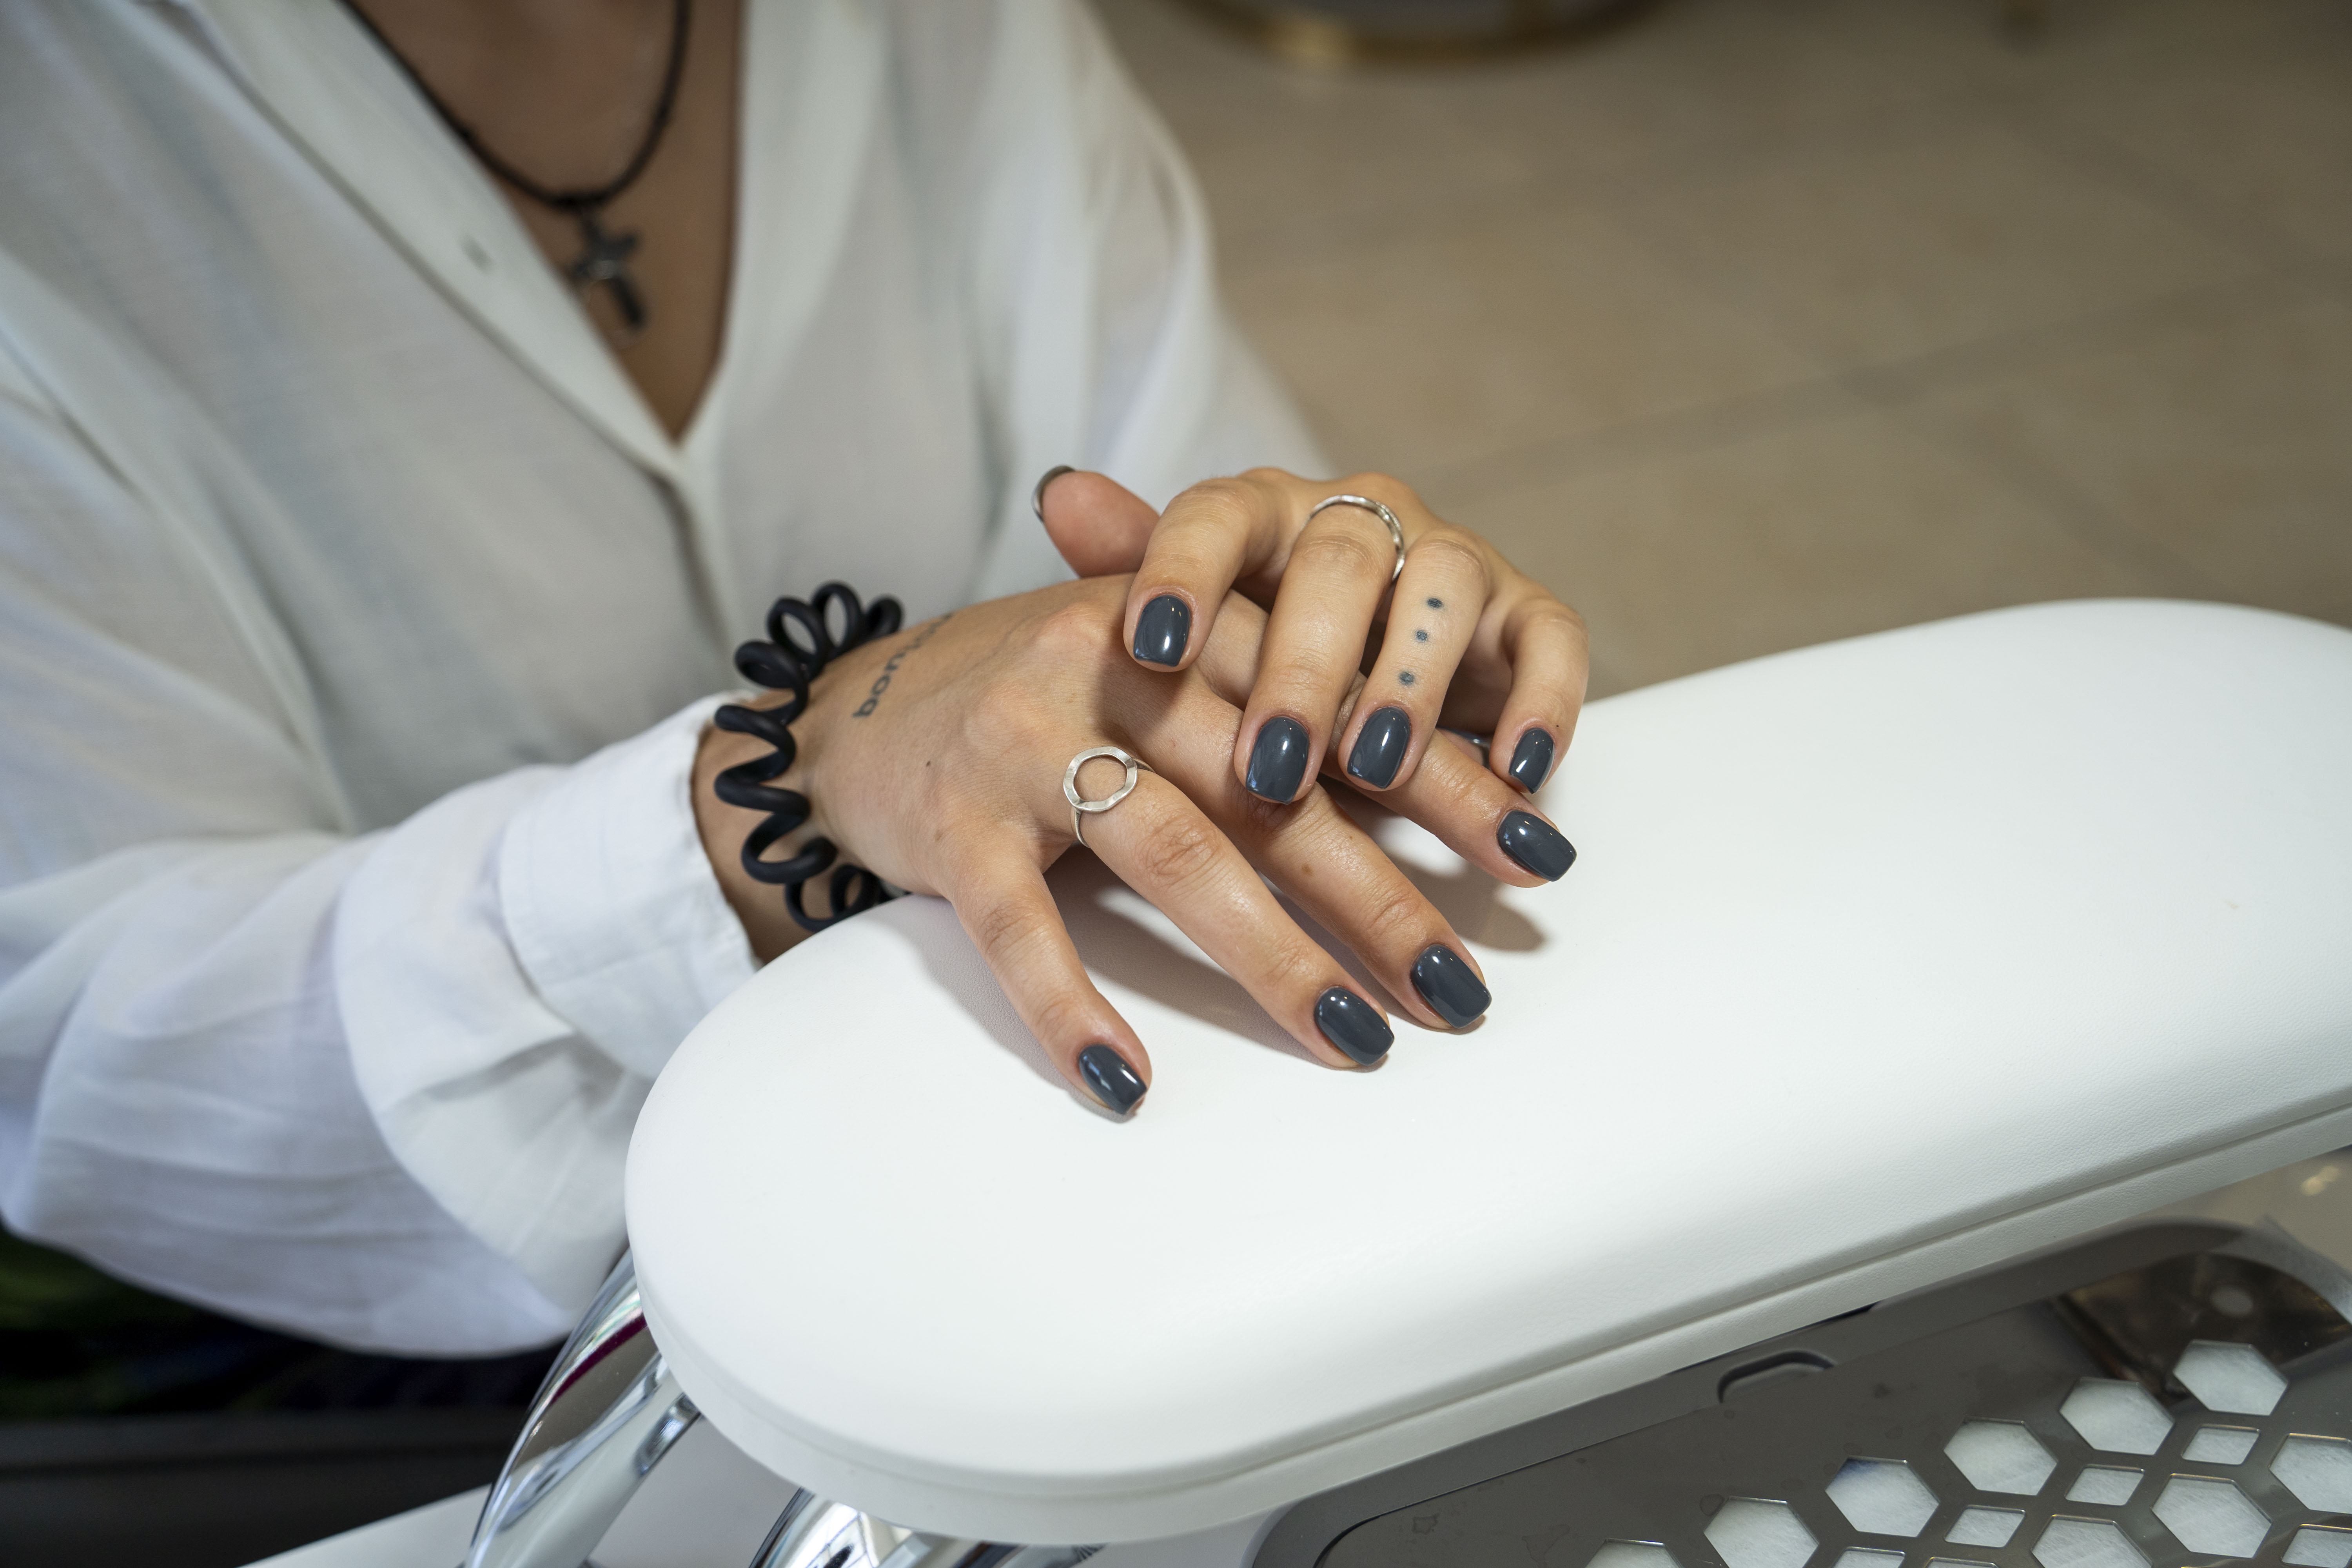 With quality in mind, TK Nails brings Russian manicures to Westwood ...